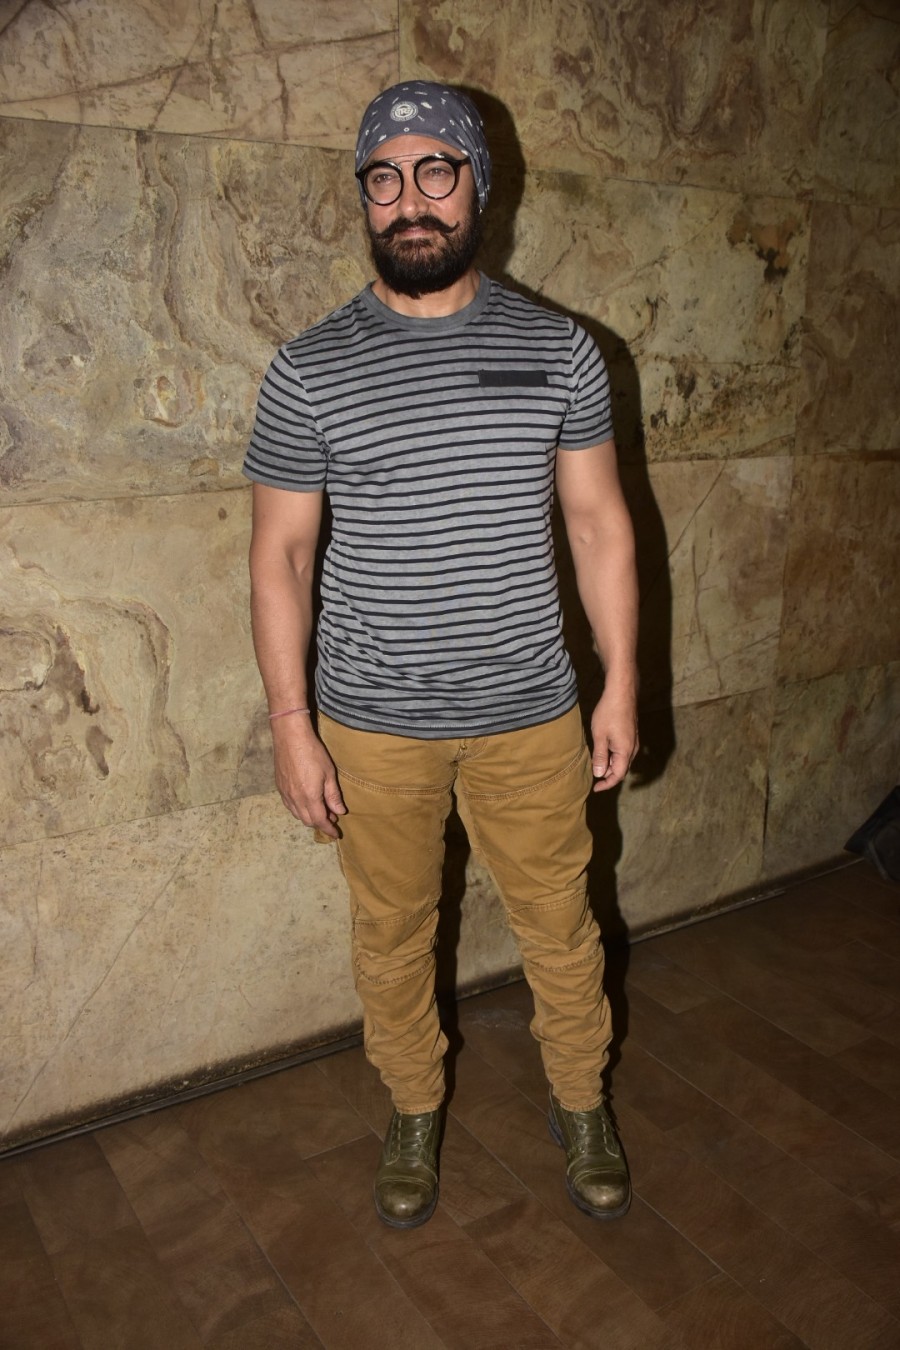 Aamir Khan's body transformation from 97 kgs to six packs ...